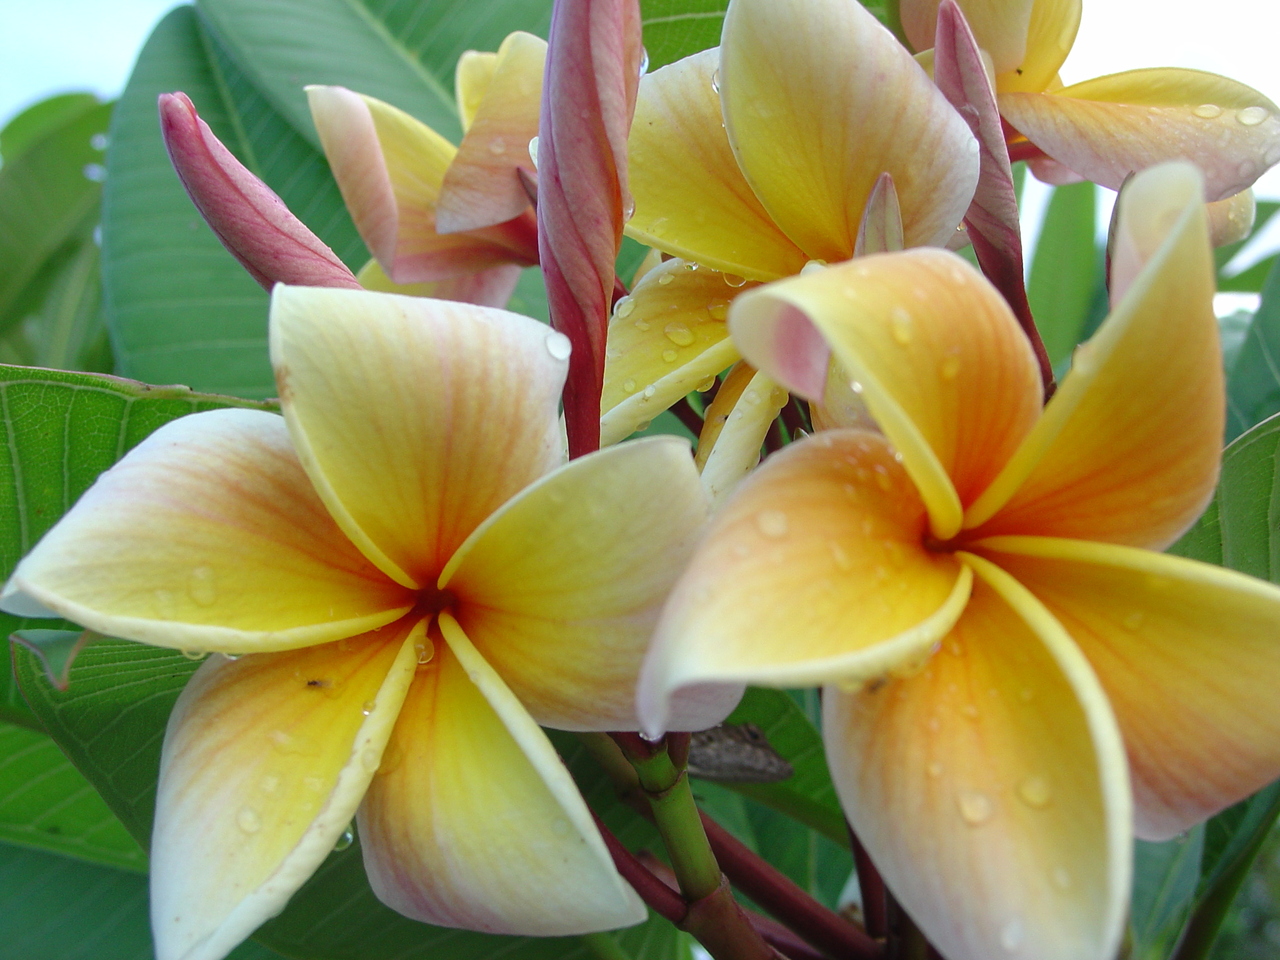 Aztec Peach (rooted) Plumeria Questions & Answers